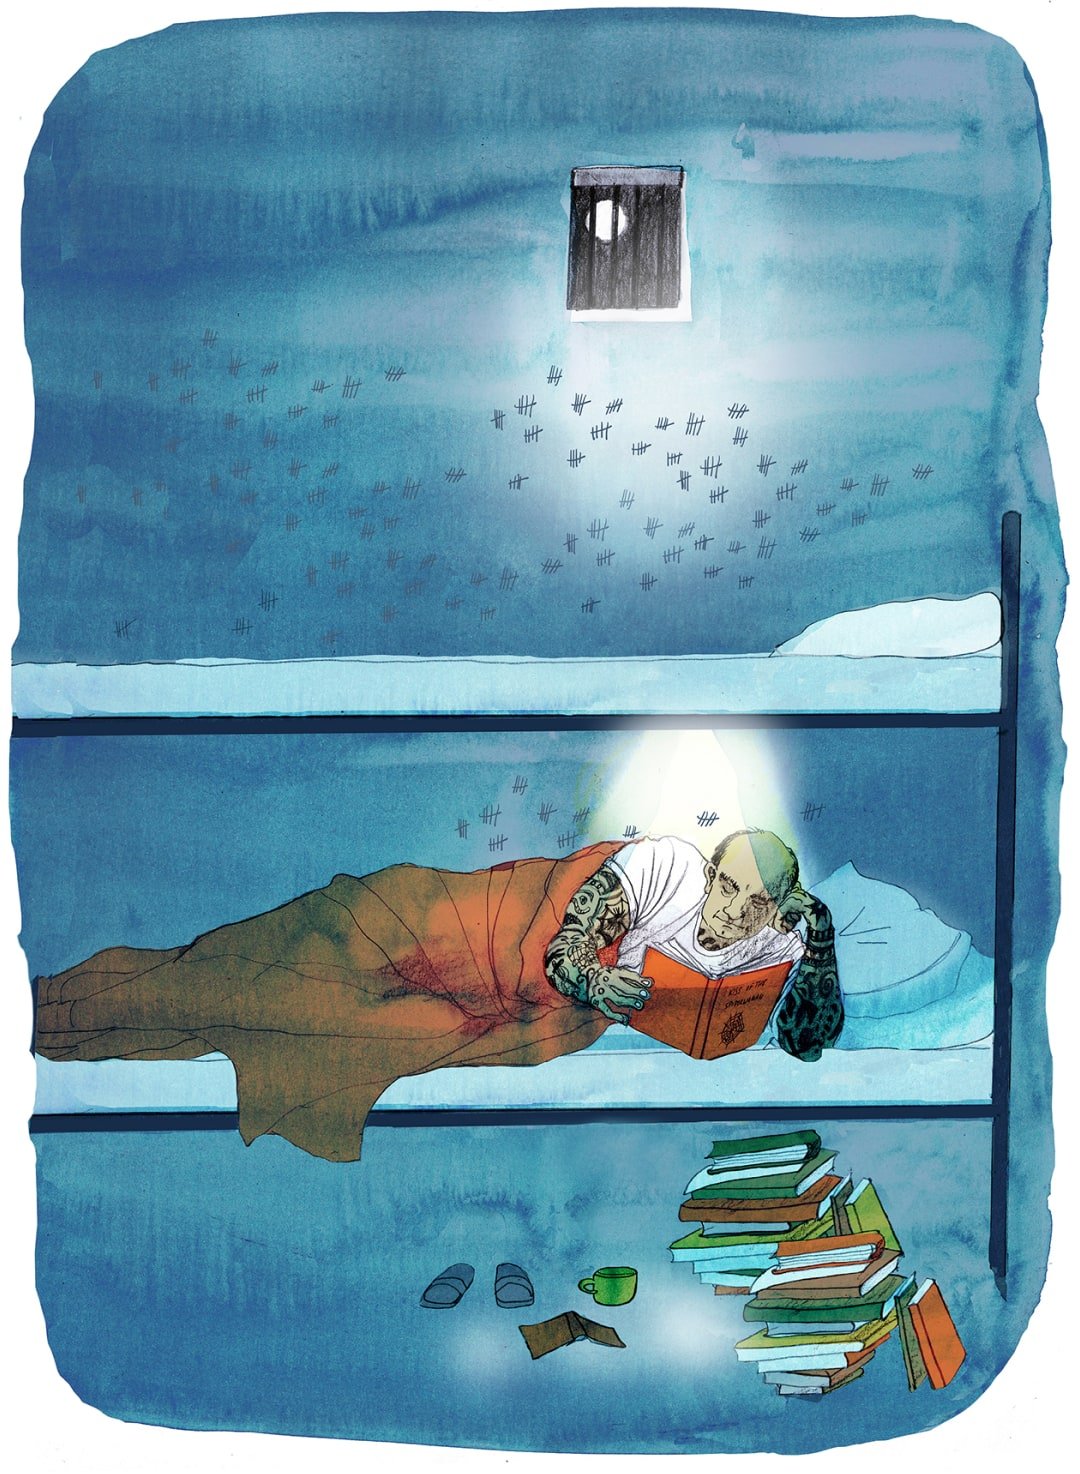 A man in a dark prison cell bunk bed reads a book by torch-light. A stack of books is next to him on the floor. The wall is marked with a tally of days that have passed.